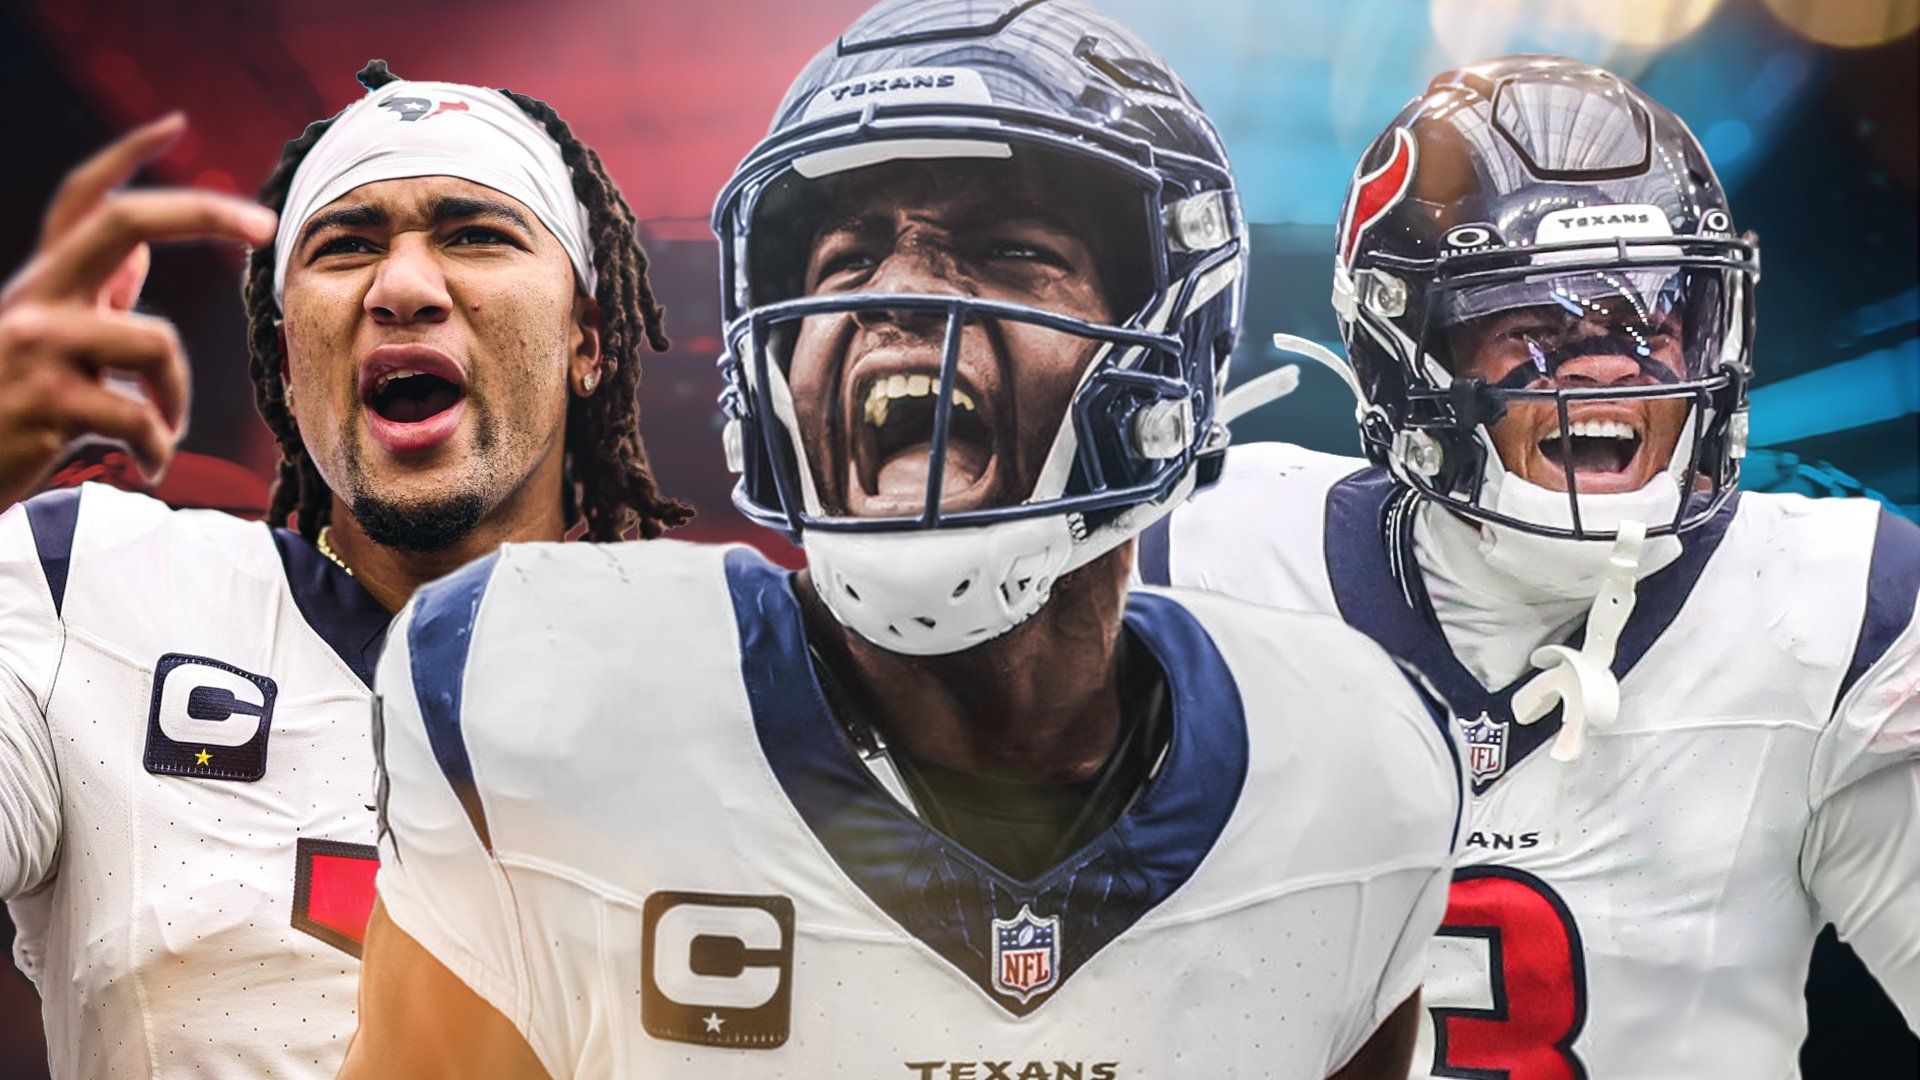 How an astonishing turnaround impacts Texans' future plans - SportsMap